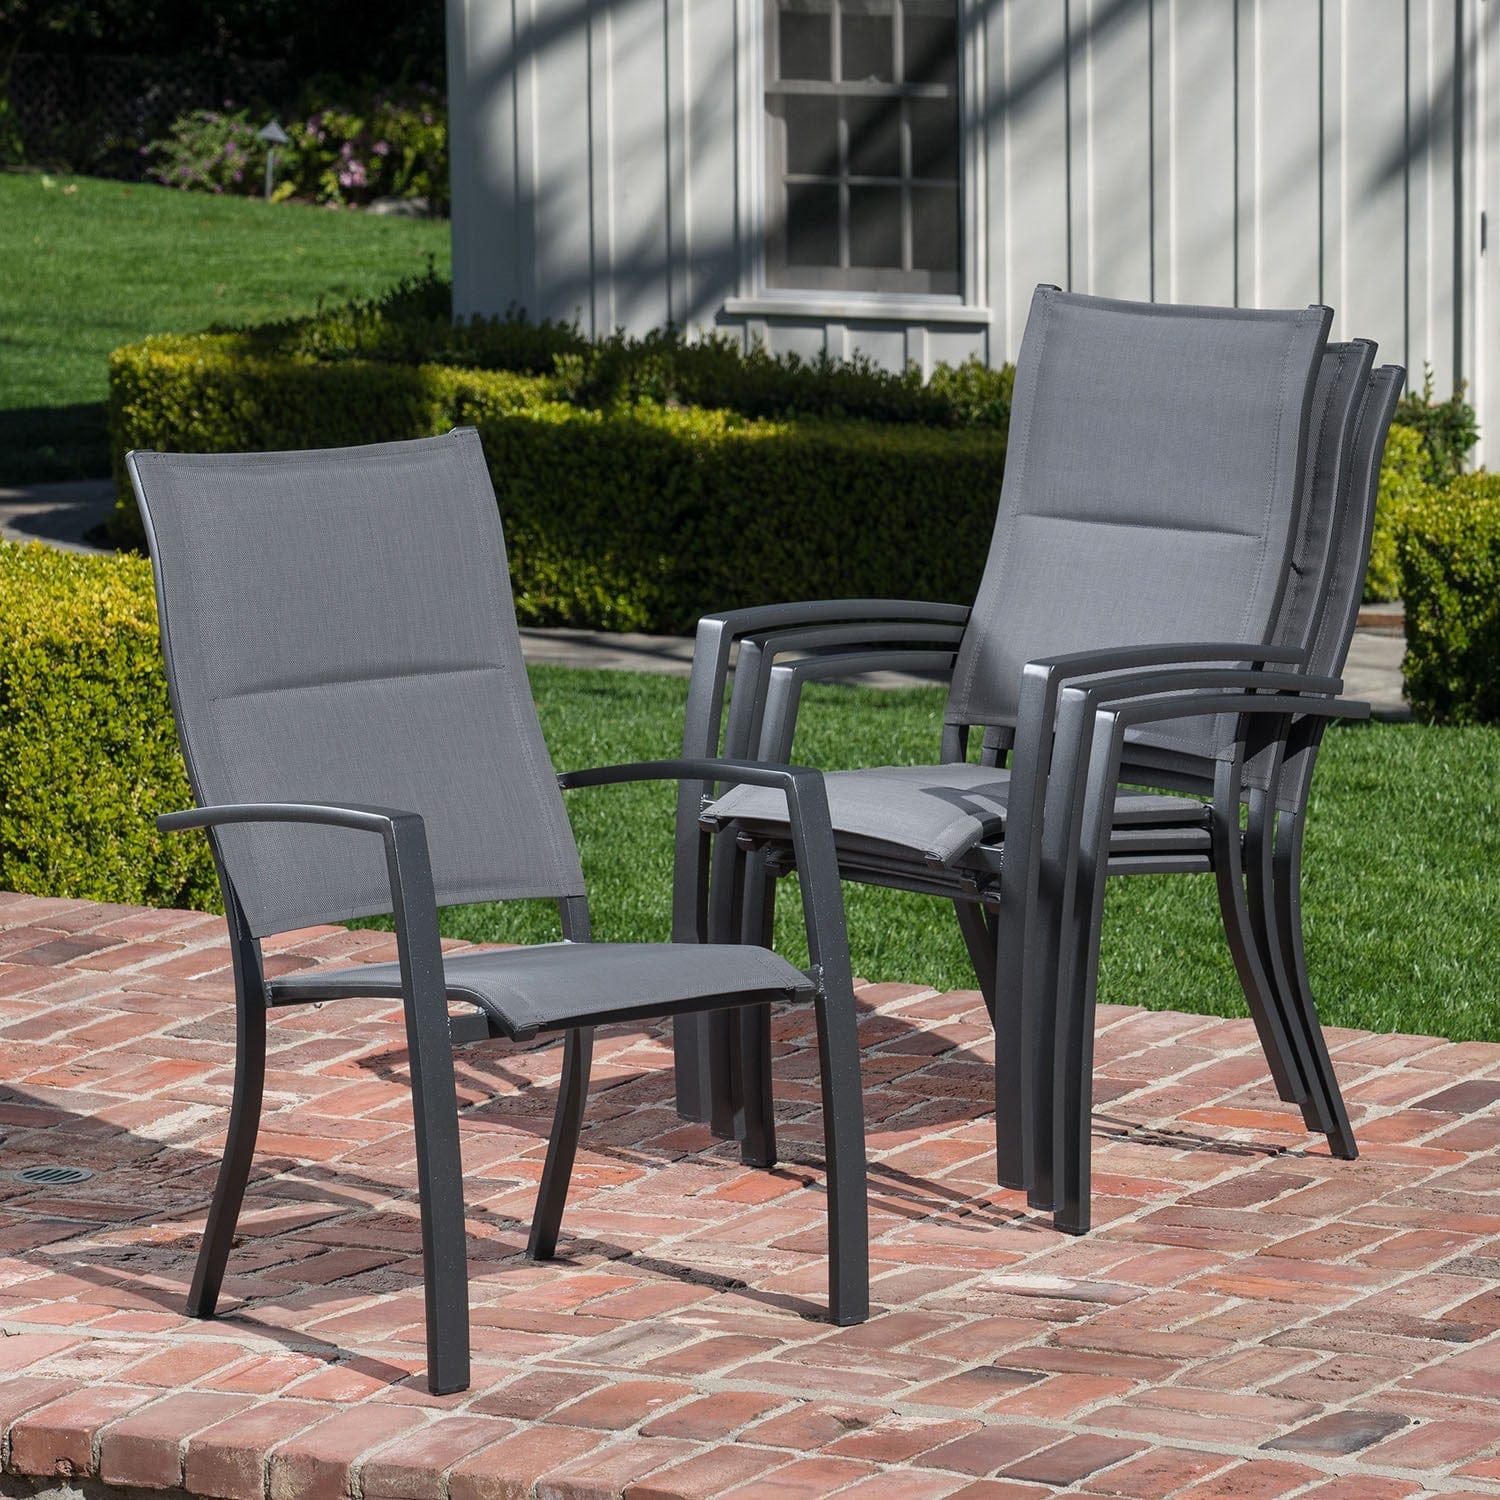 Hanover Outdoor Dining Set Hanover - Dawson 11 Piece Dining Set with 10 Padded Sling Chairs and an Expandable 40" x 118" Table | DAWDN11PCHB-GRY